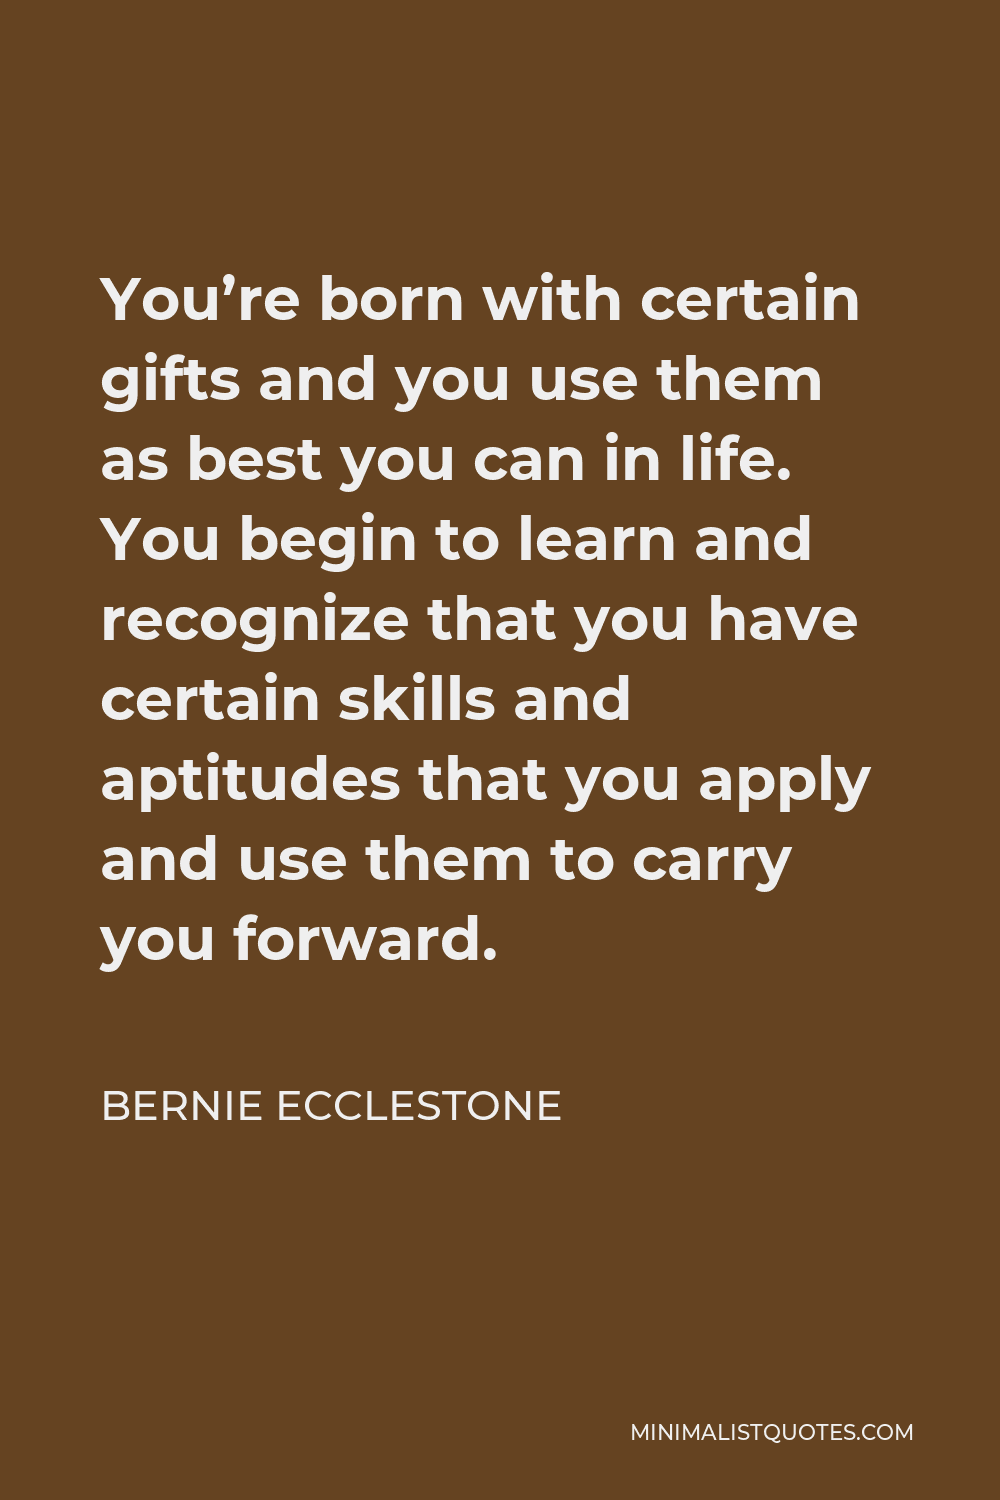 Bernie Ecclestone Quote - You’re born with certain gifts and you use them as best you can in life. You begin to learn and recognize that you have certain skills and aptitudes that you apply and use them to carry you forward.